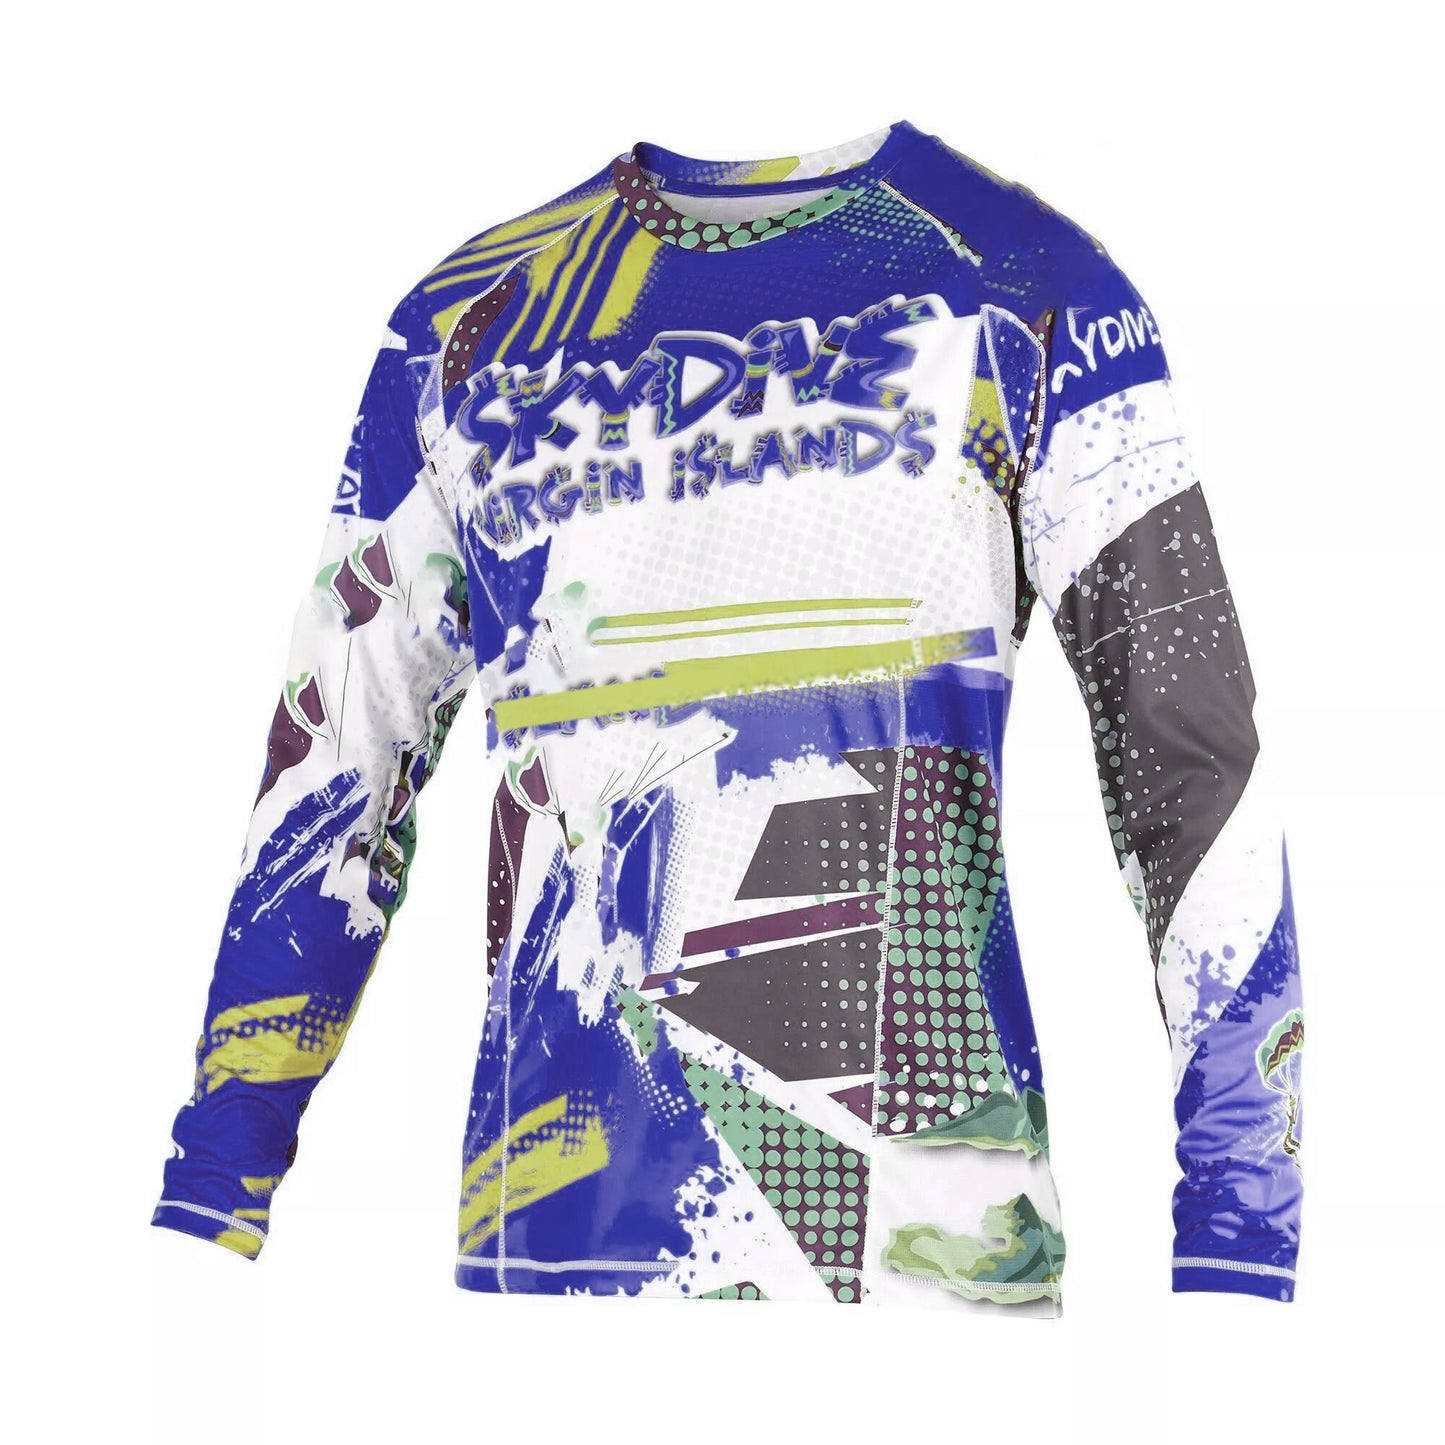 Skydiving sublimation printed jersey-021